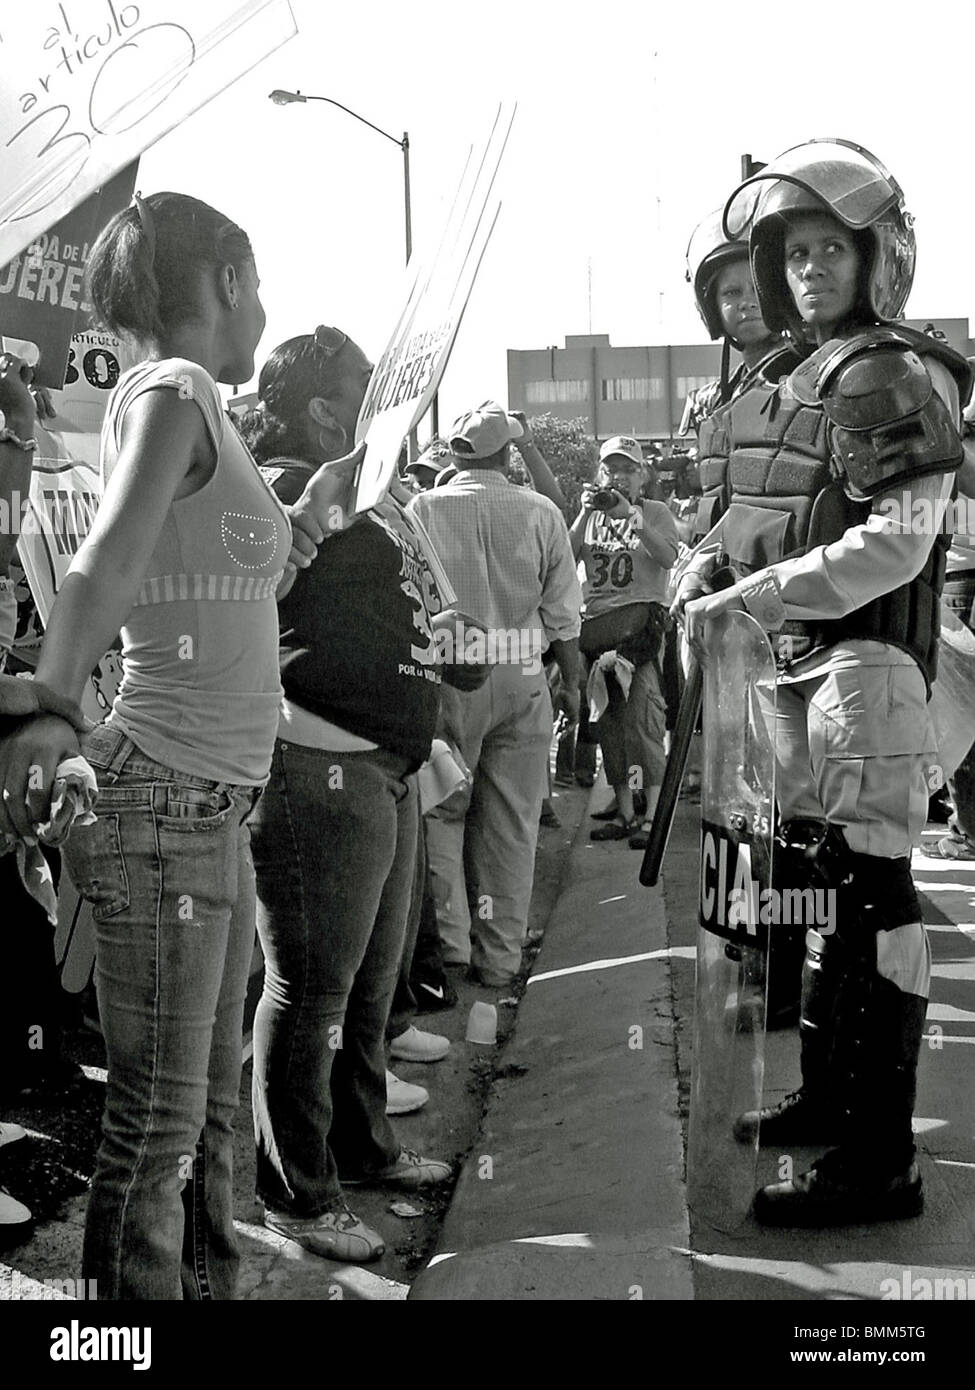 Female riot police at a protest over 'article 30' of the Dominican Republic constitution that has made abortion illegal Stock Photo